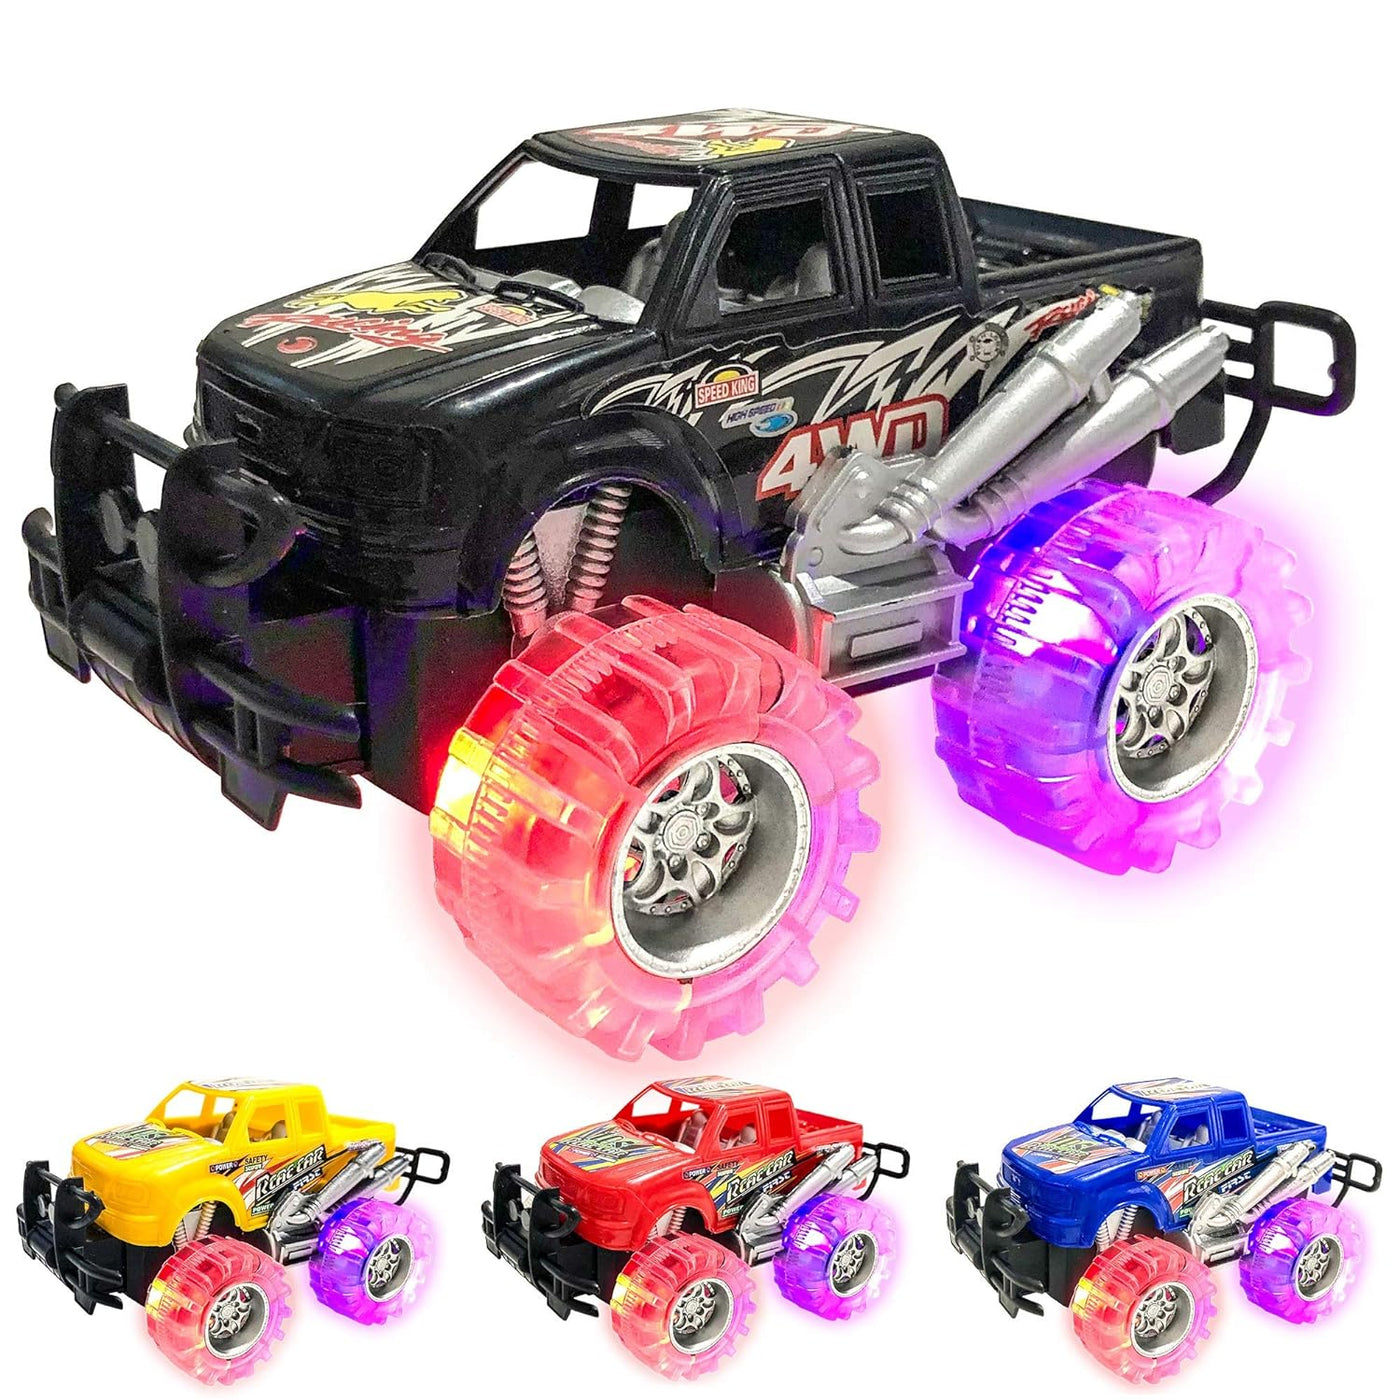 Light Up Monster Trucks Set of 4 - Black, Red, Blue, and Yellow